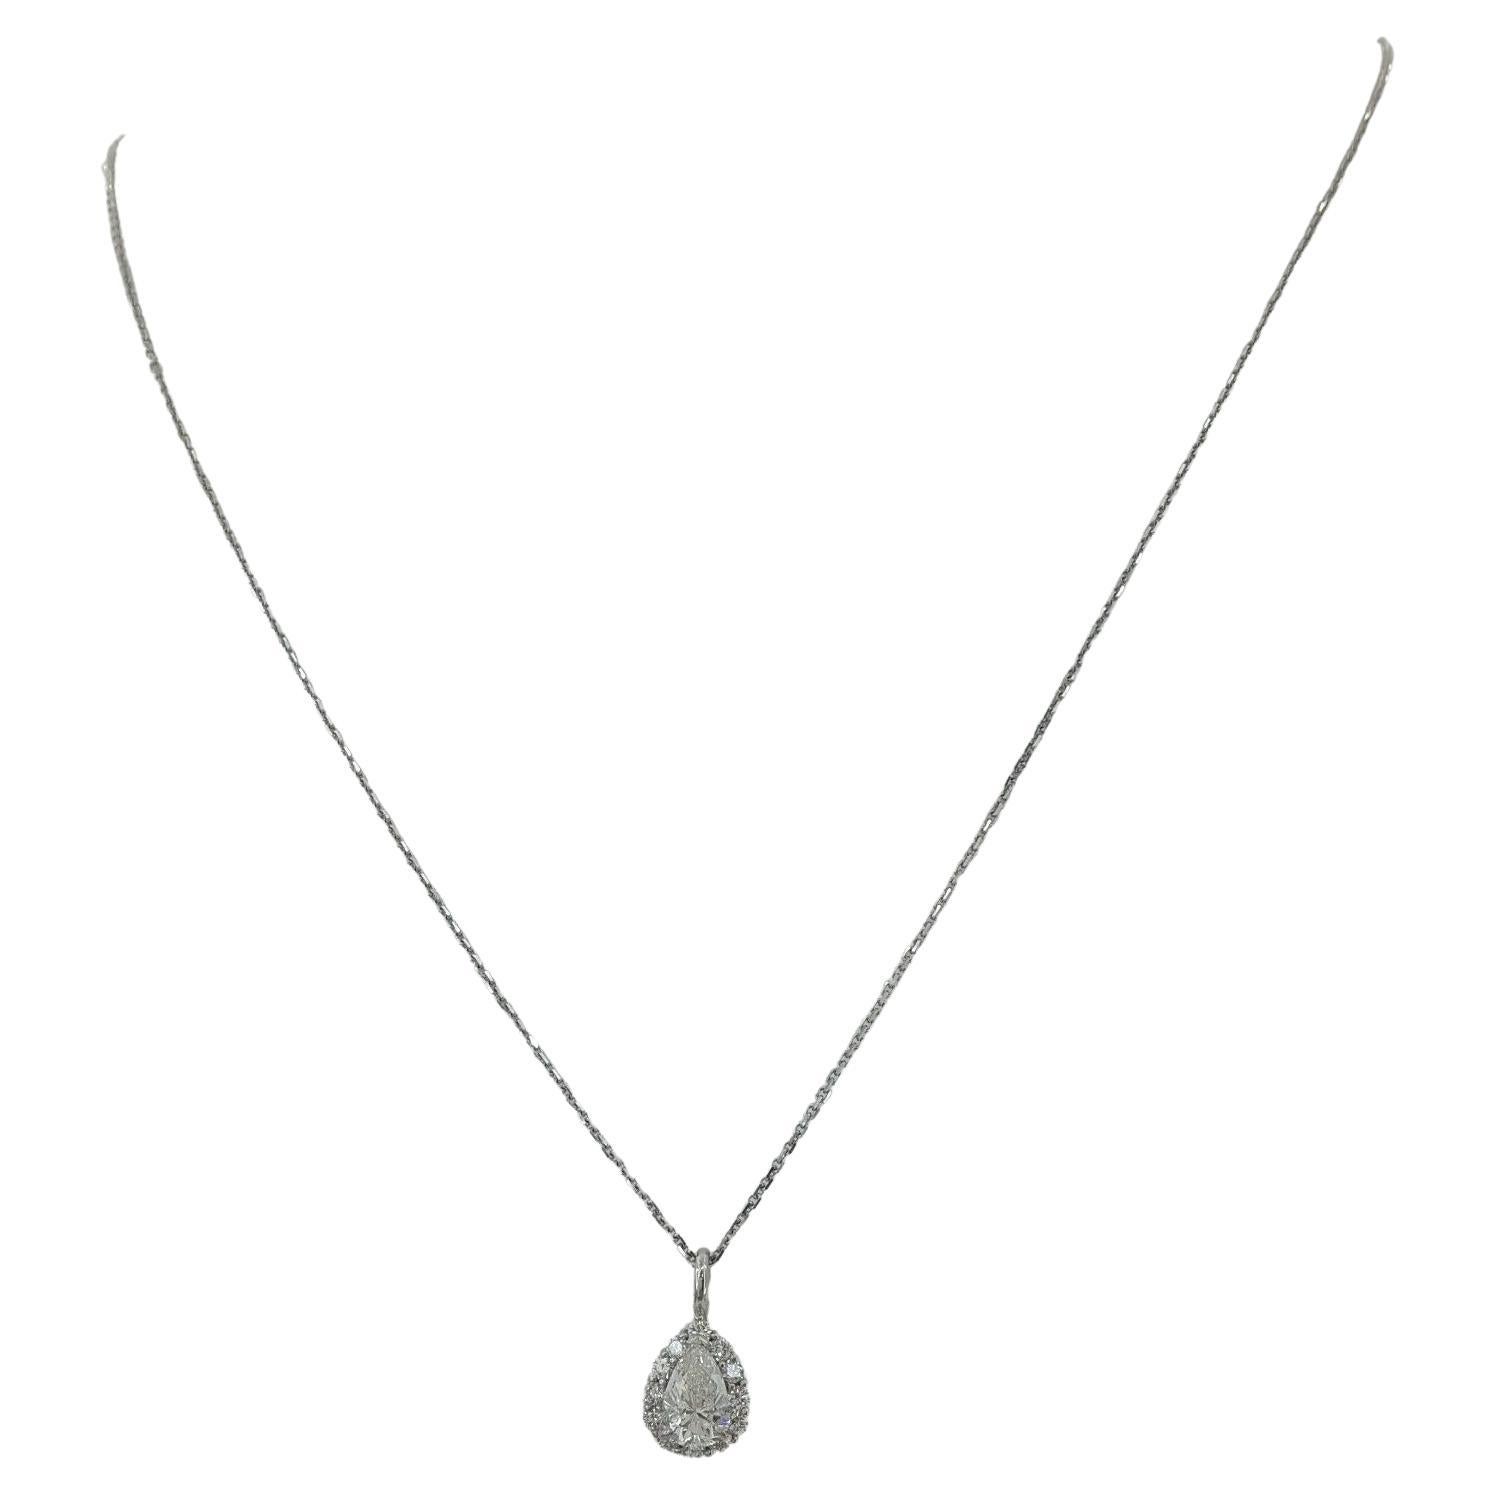 A 14K white gold pear brilliant-cut diamond halo pendant/necklace with a total weight of 1.01 carats is presented on an 18-inch chain. The pendant, including the chain, weighs 2.8 grams, and its dimensions are 10.3 mm long (14.9 mm with bail) and